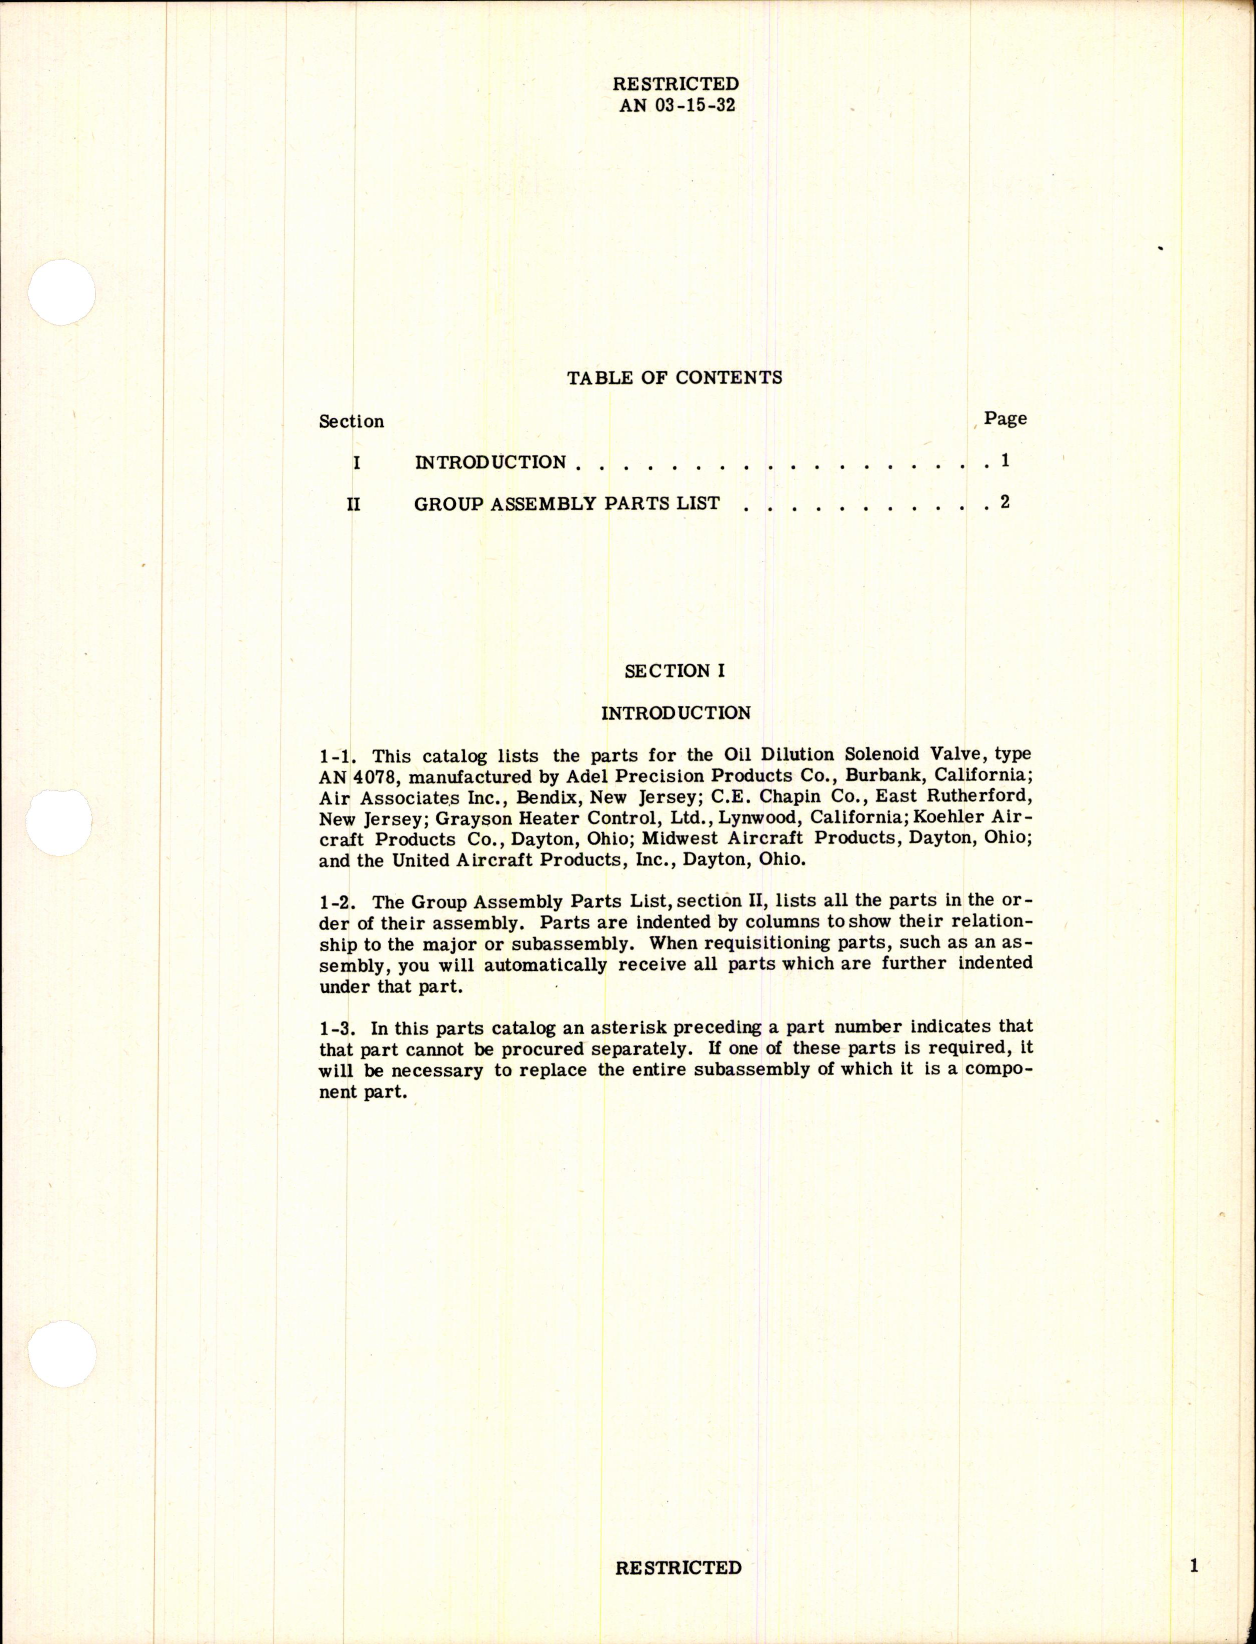 Sample page 3 from AirCorps Library document: Parts Catalog for Oil Dilution Solenoid Valve - AN4078